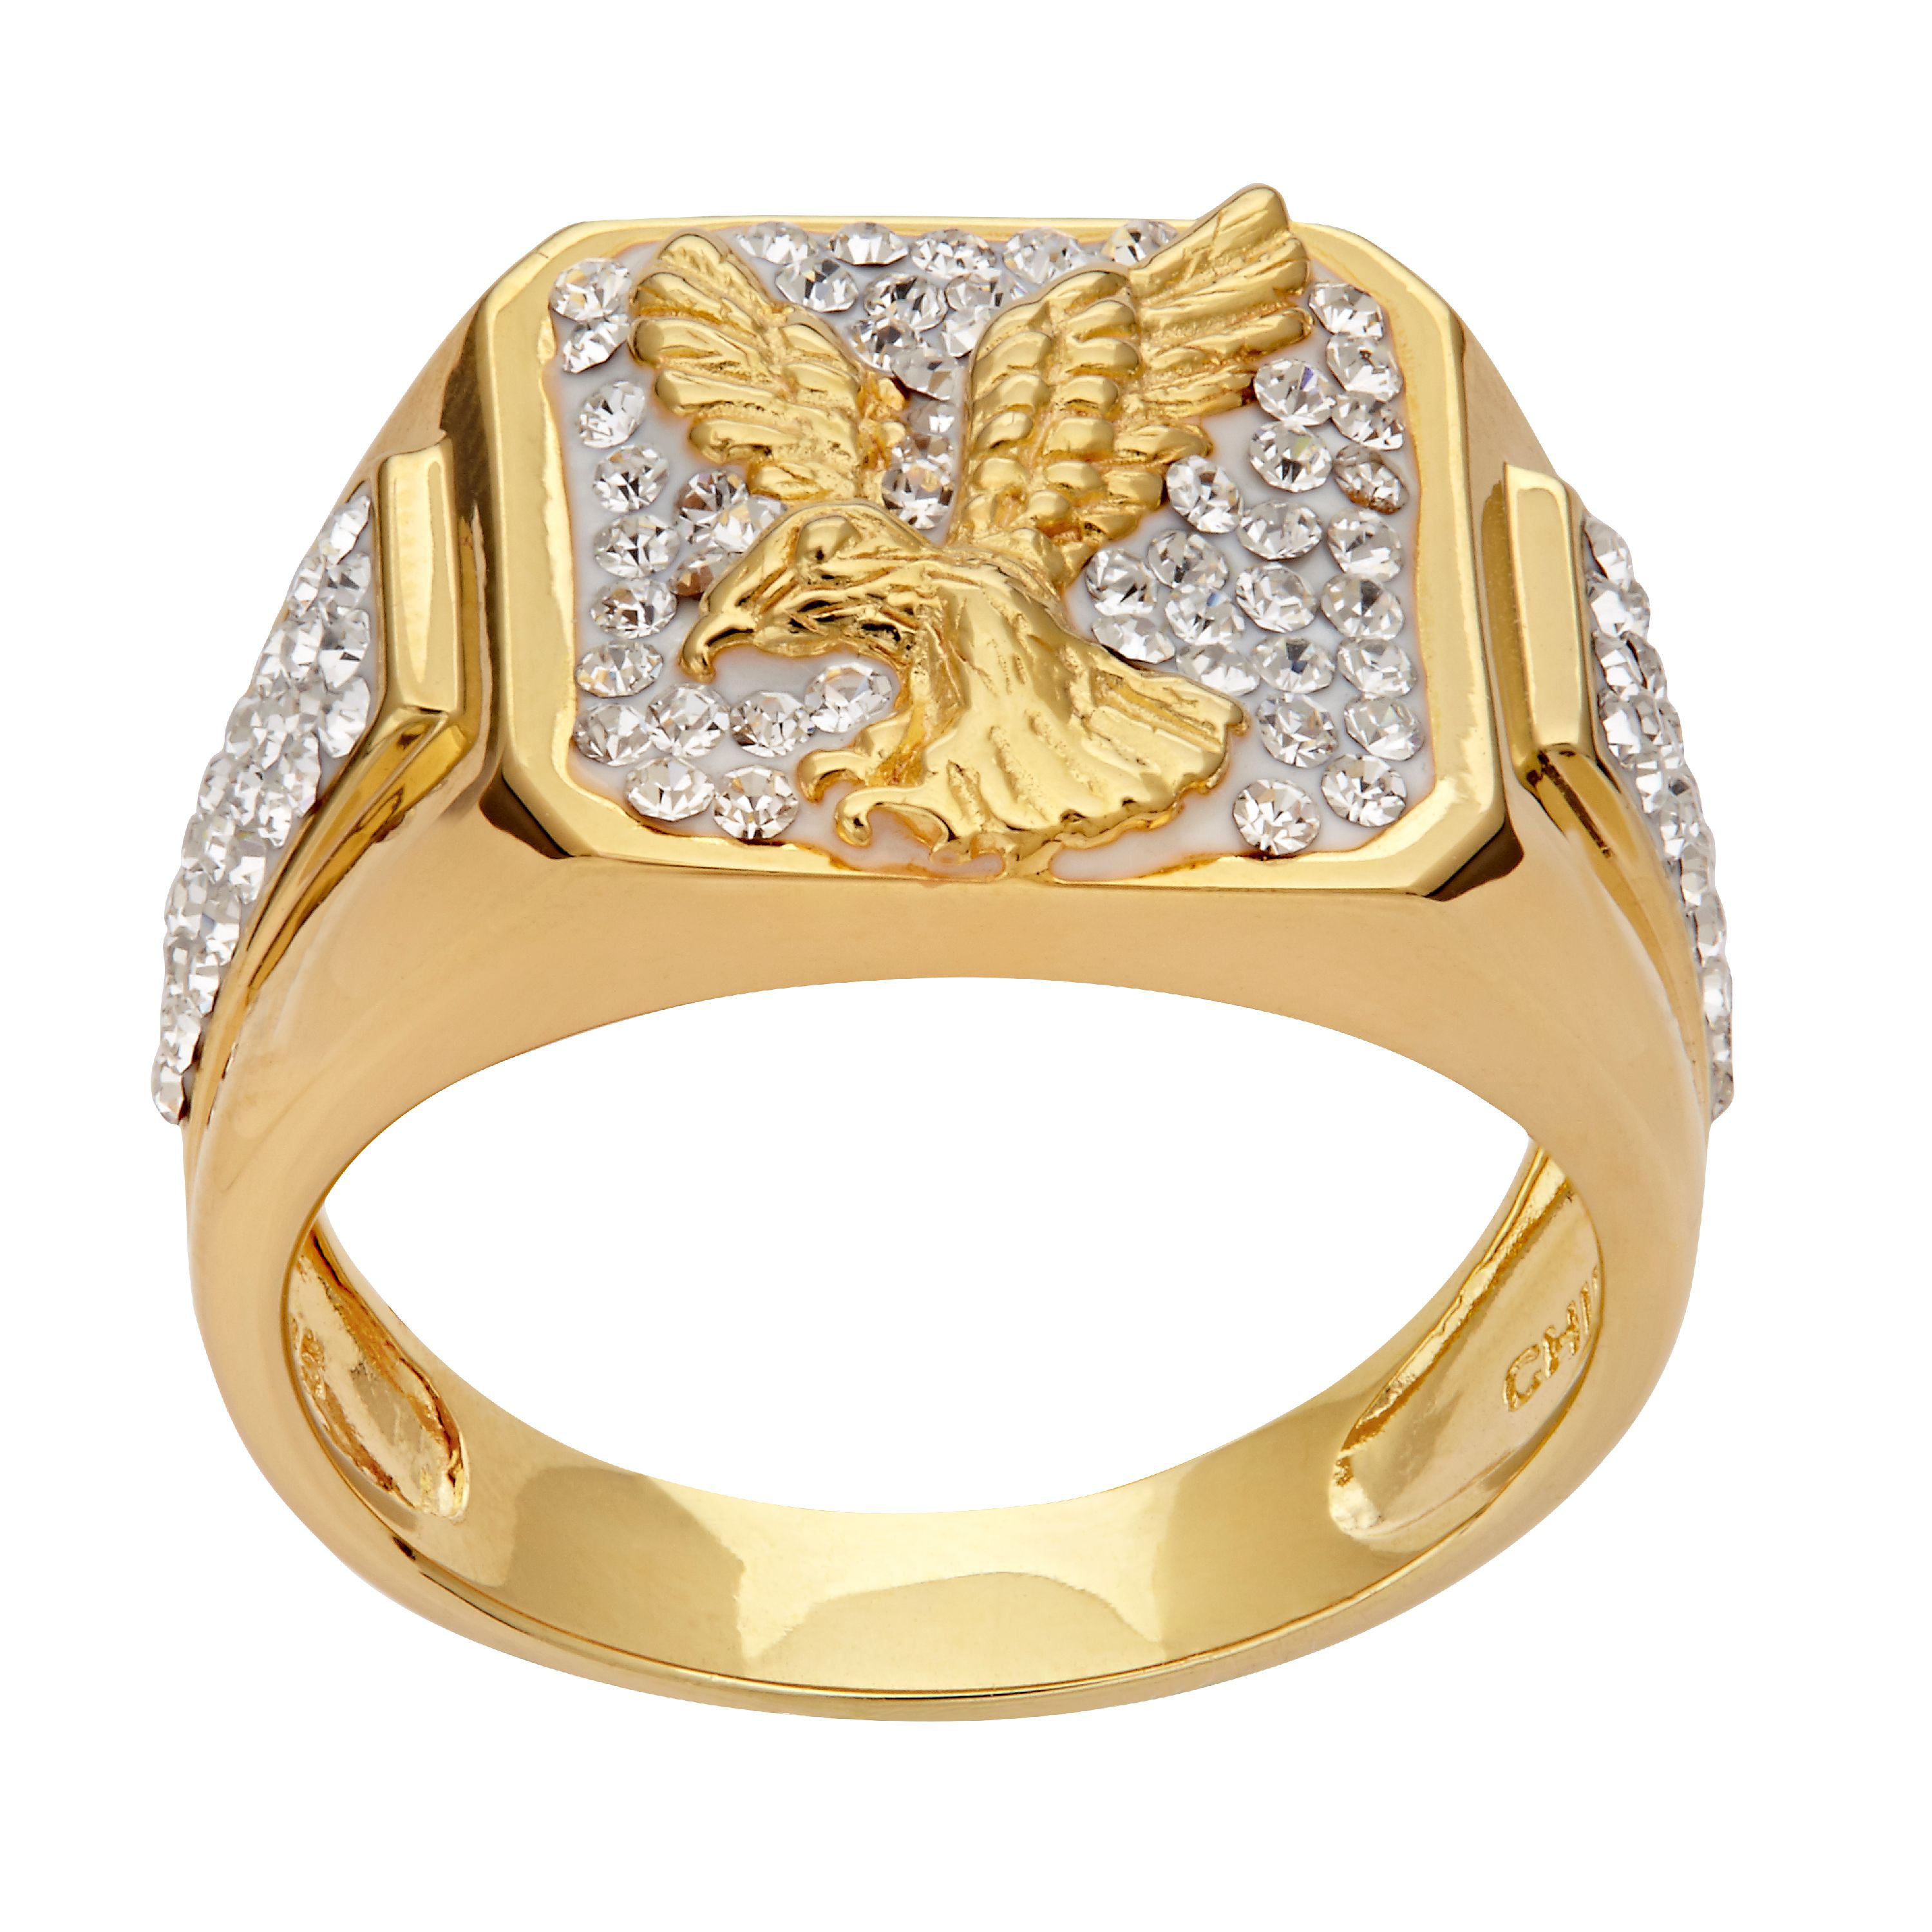 Sterling Silver Eagle Ring for Women Large 1 1/4 inch 